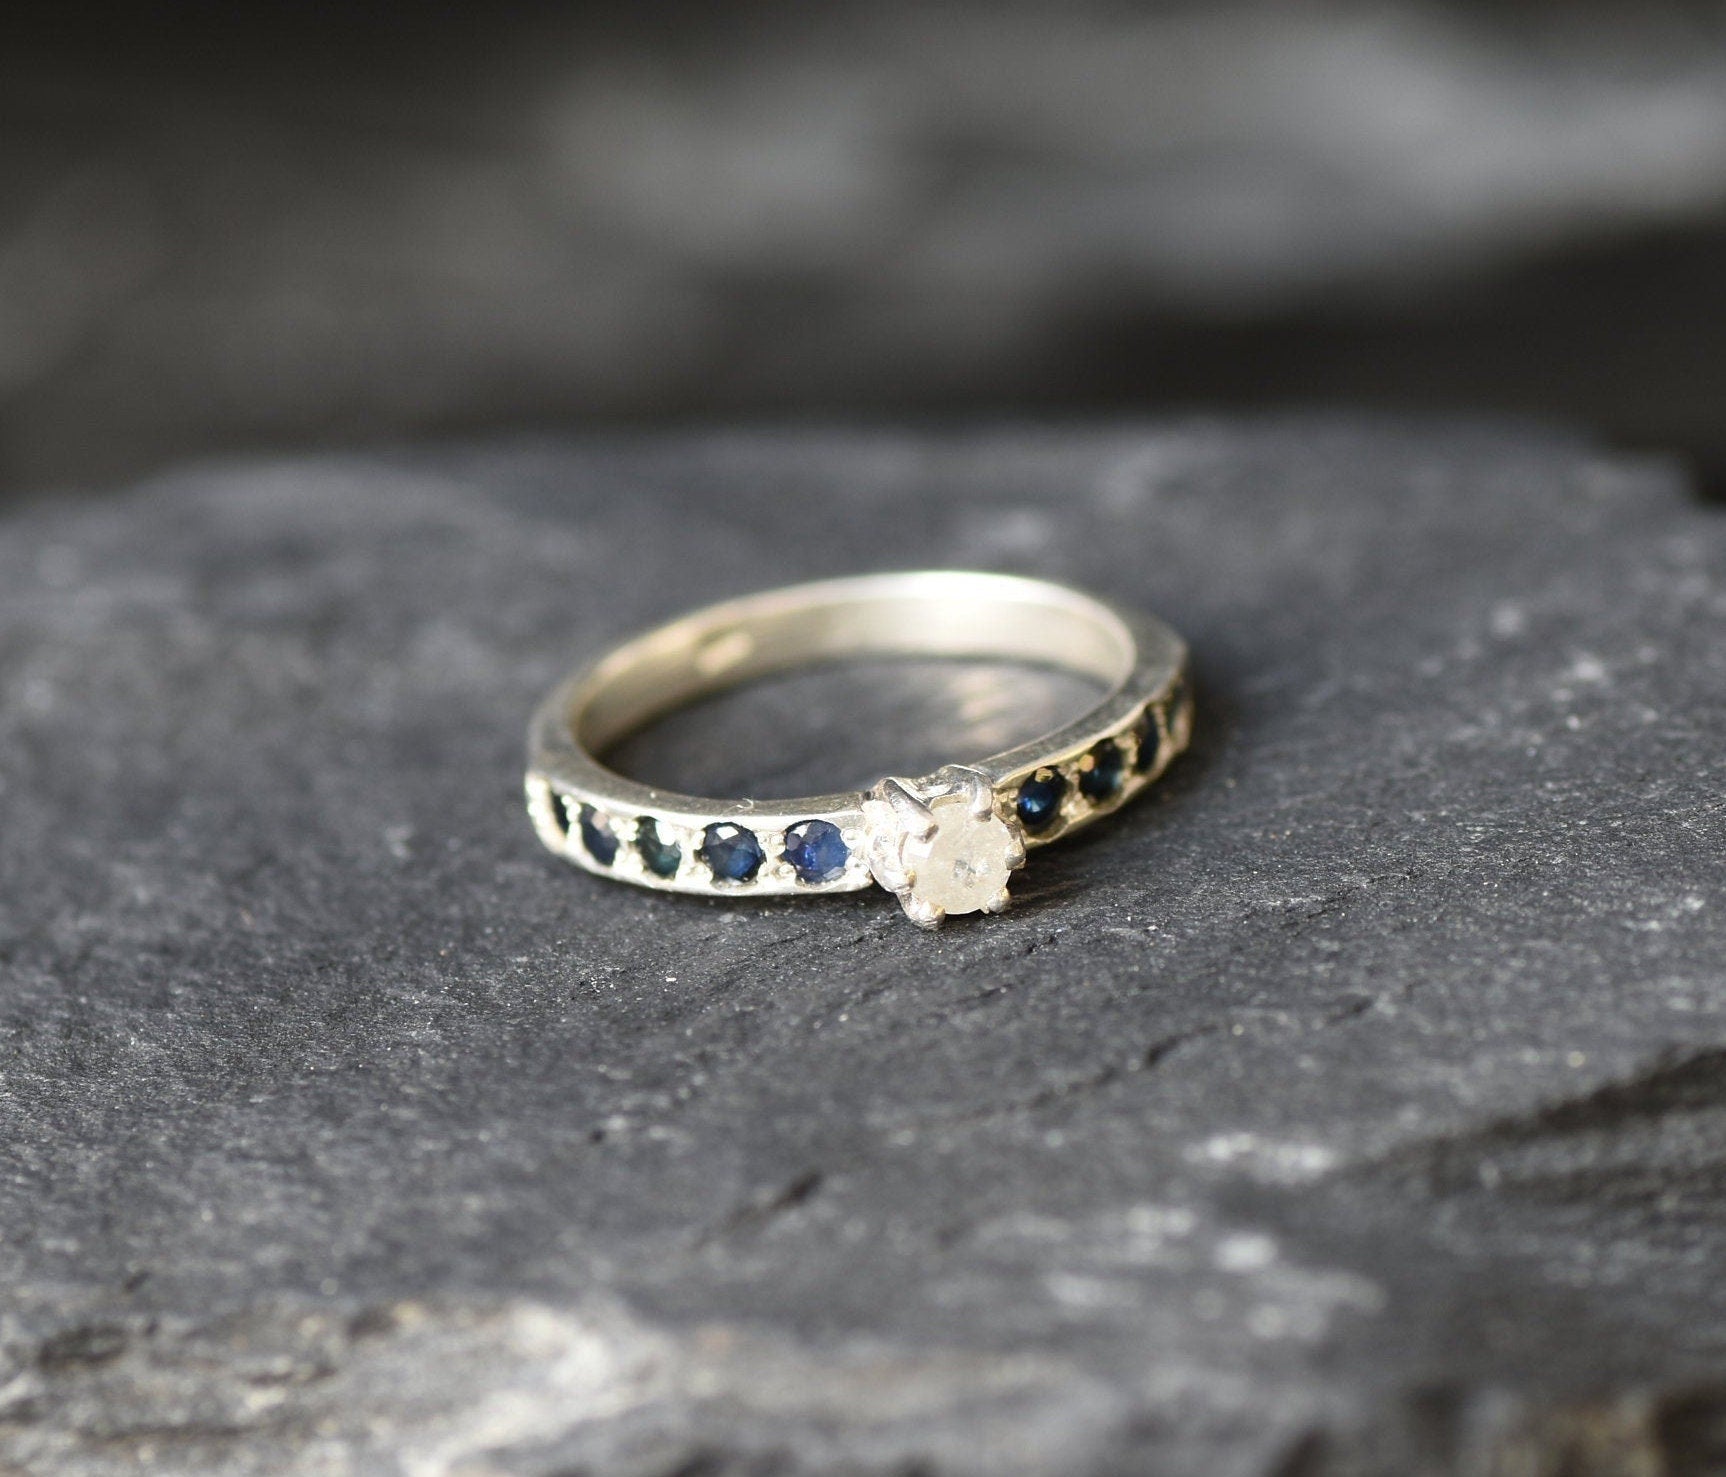 Real Diamond Ring, Natural Diamond, Engagement Ring, Dainty Proposal Ring, Sapphire Band, Natural Sapphire, April Birthstone, Solid Silver